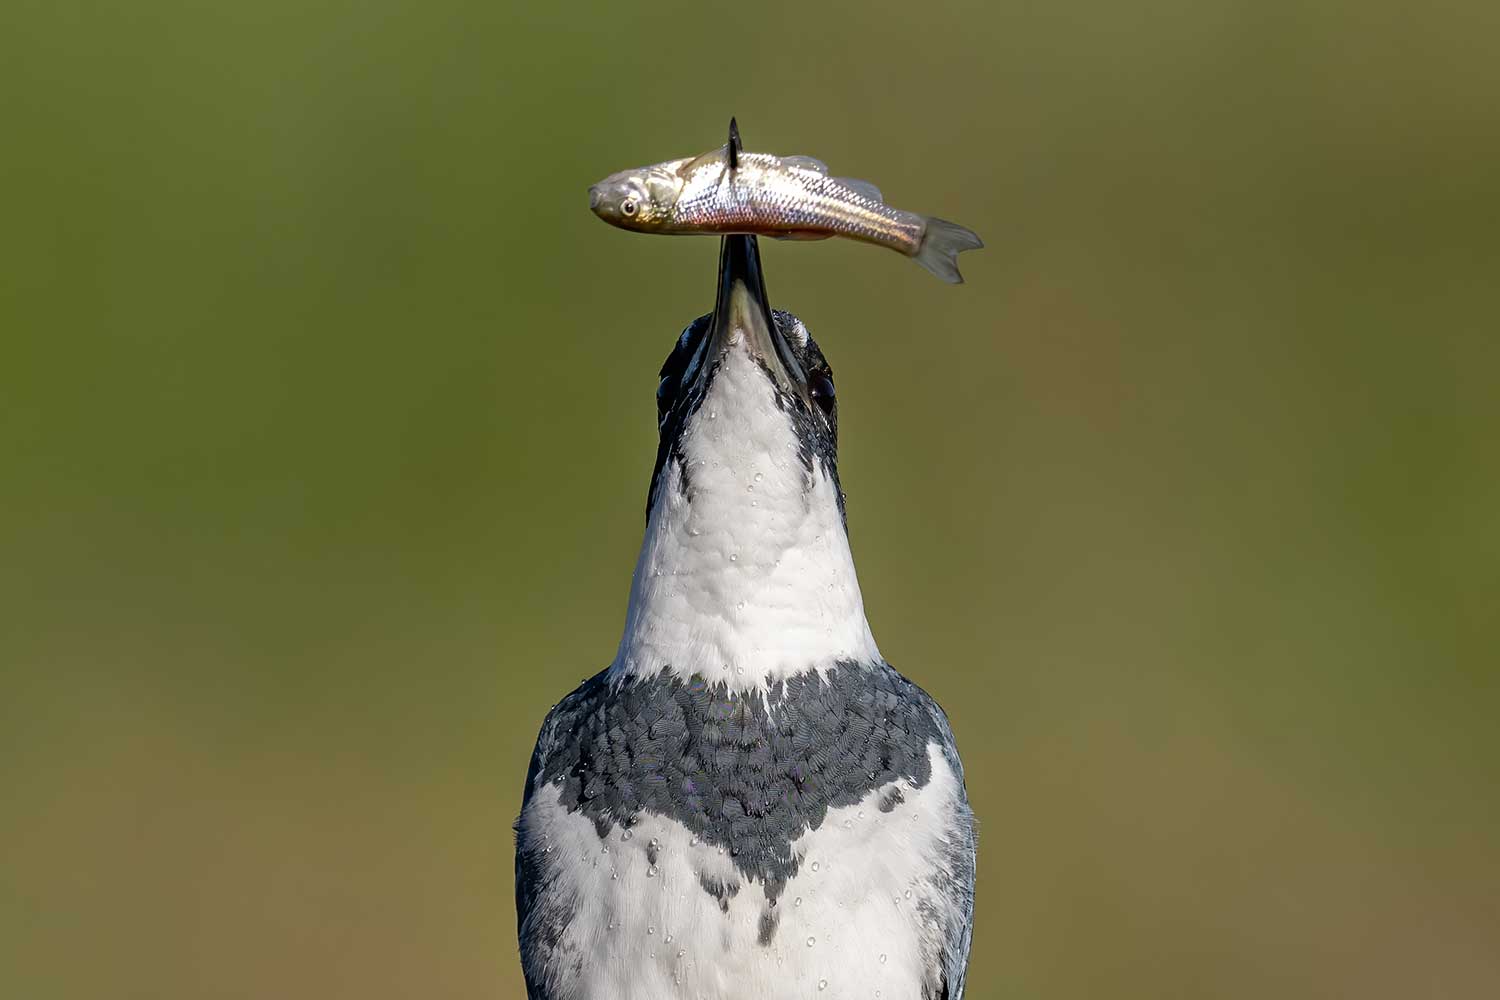 A belted kingfisher with a fish in its beak.